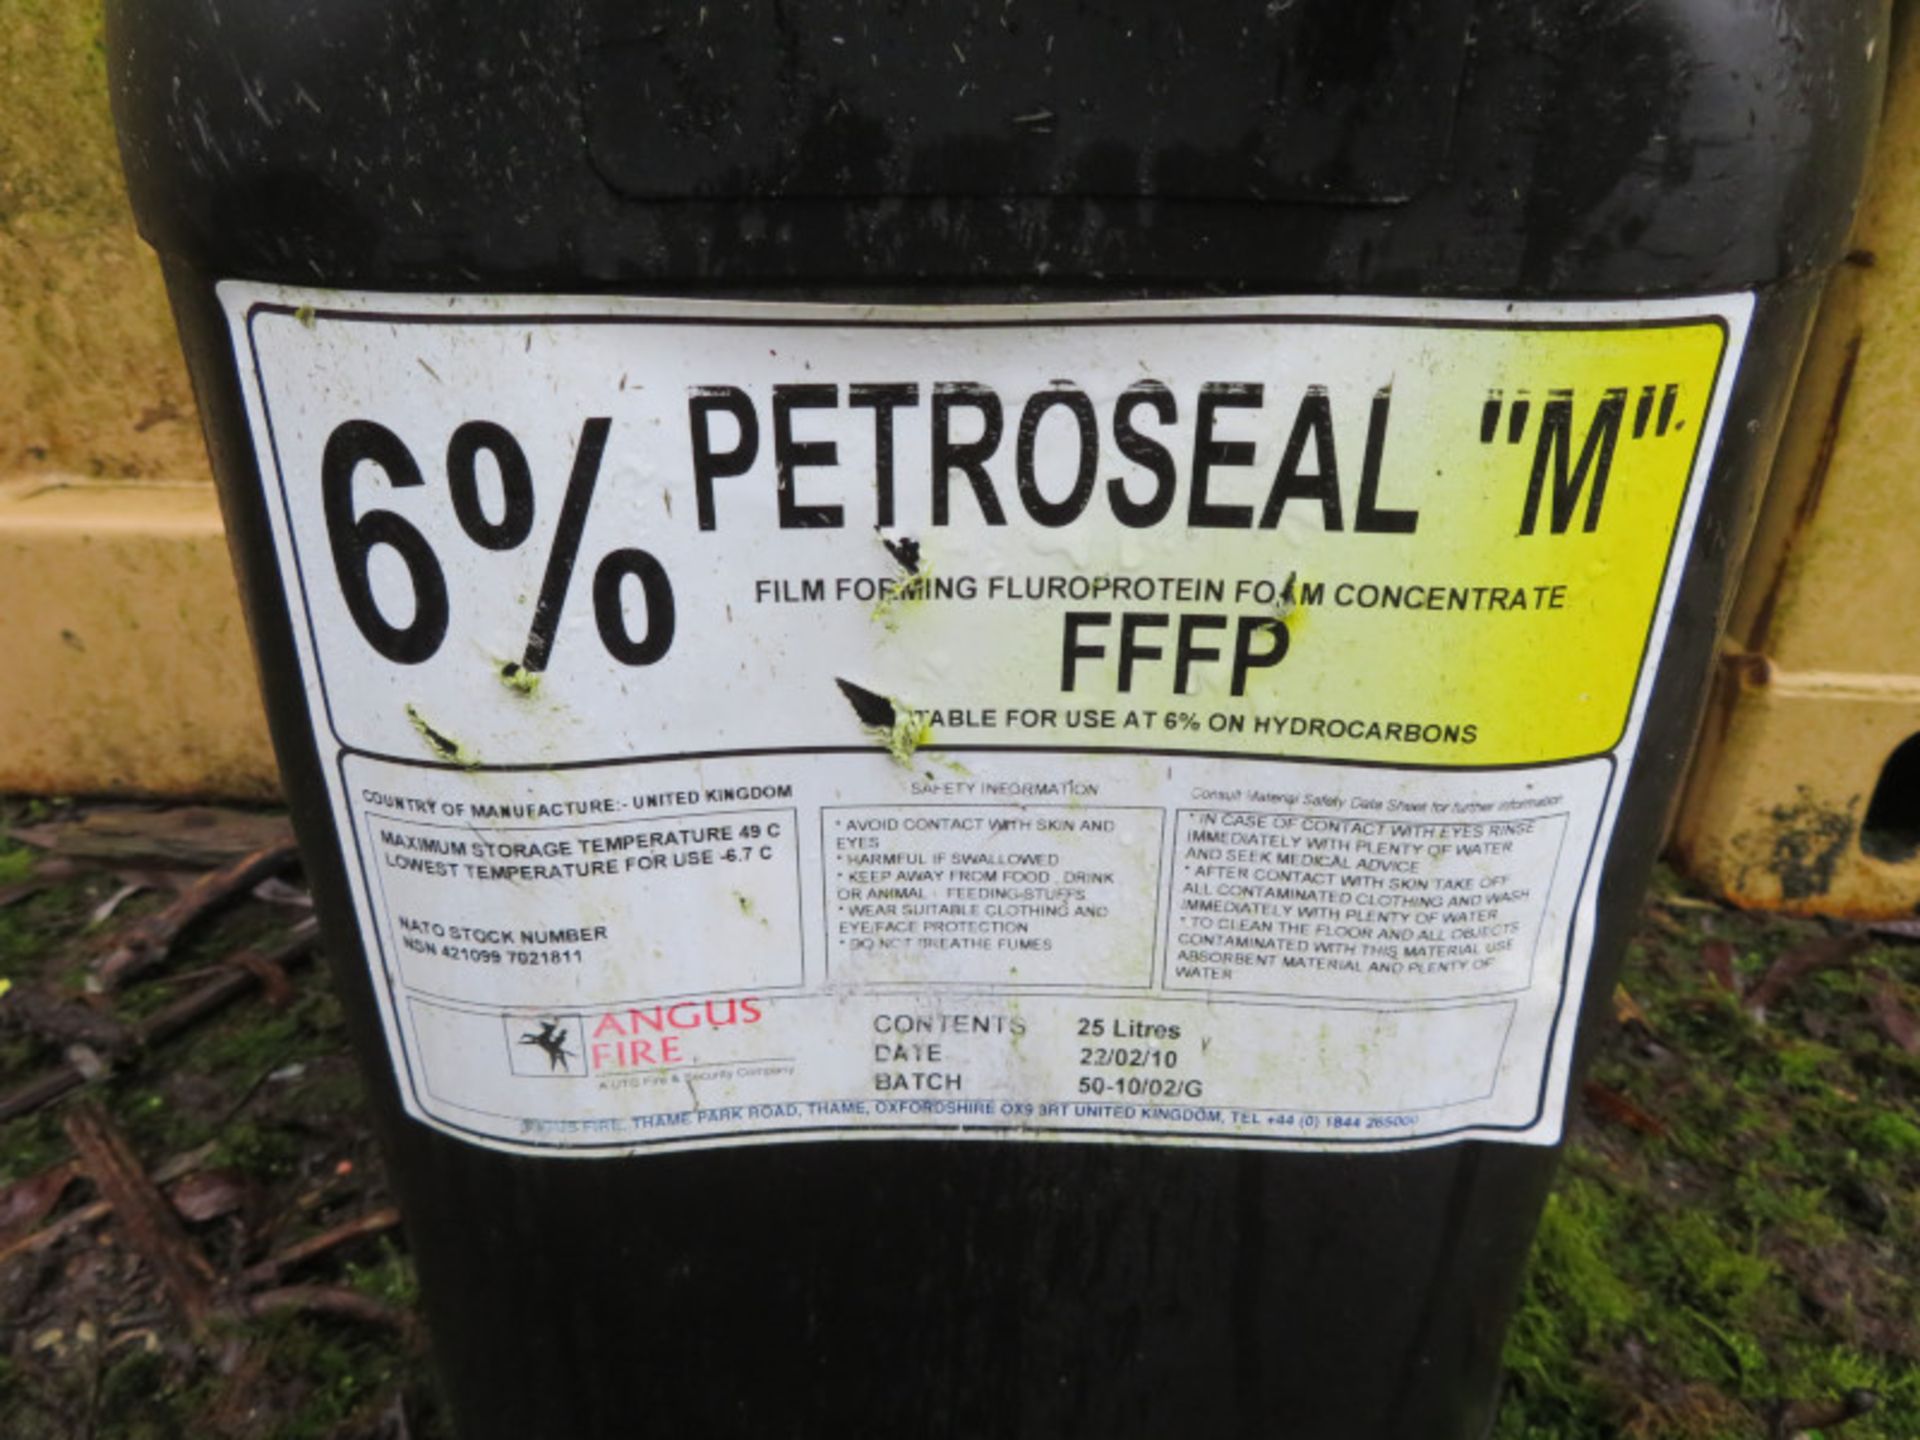 18x Angus Fire 6% Petroseal 'M' Film Foaming Fluroprotein Foam Concentrate - 25L - PLEASE - Image 4 of 4